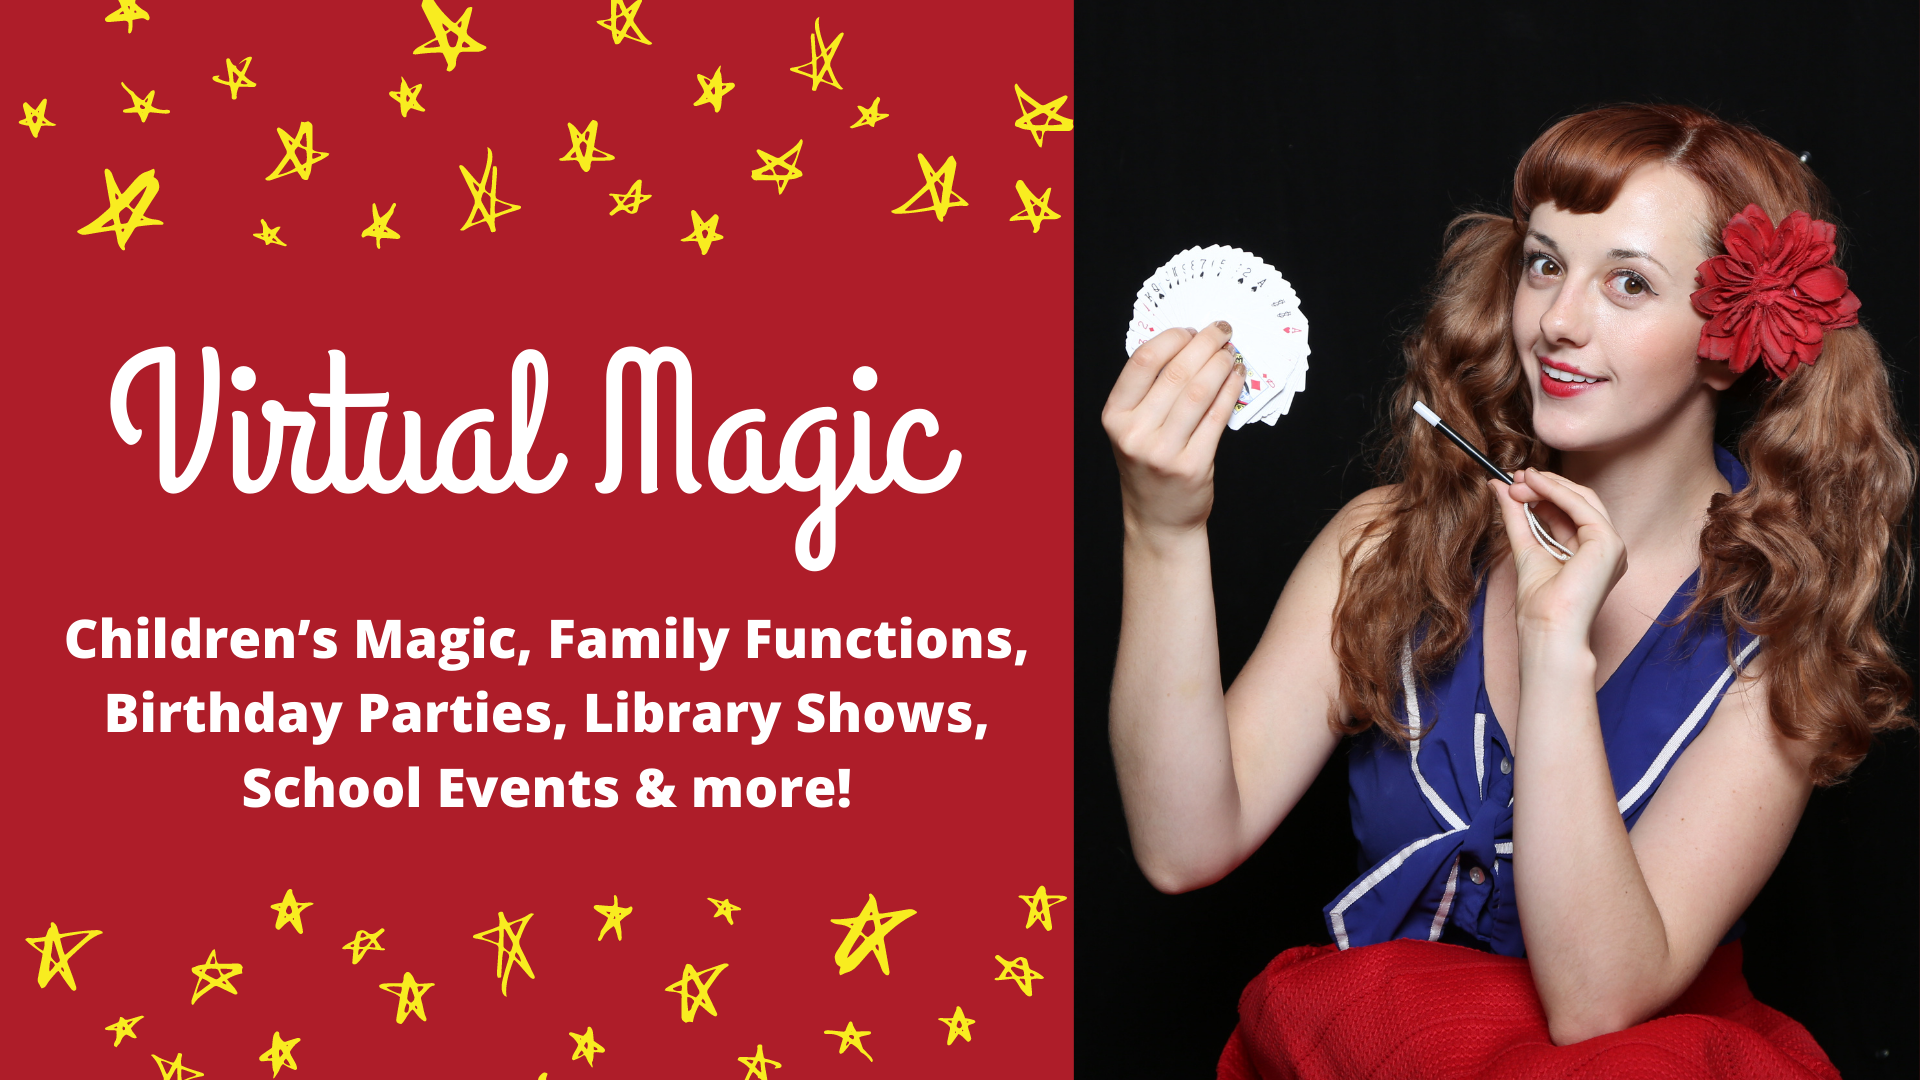 3 Highly Visual Tricks For Your Next Virtual Magic Show That Are Super Easy For Virtual